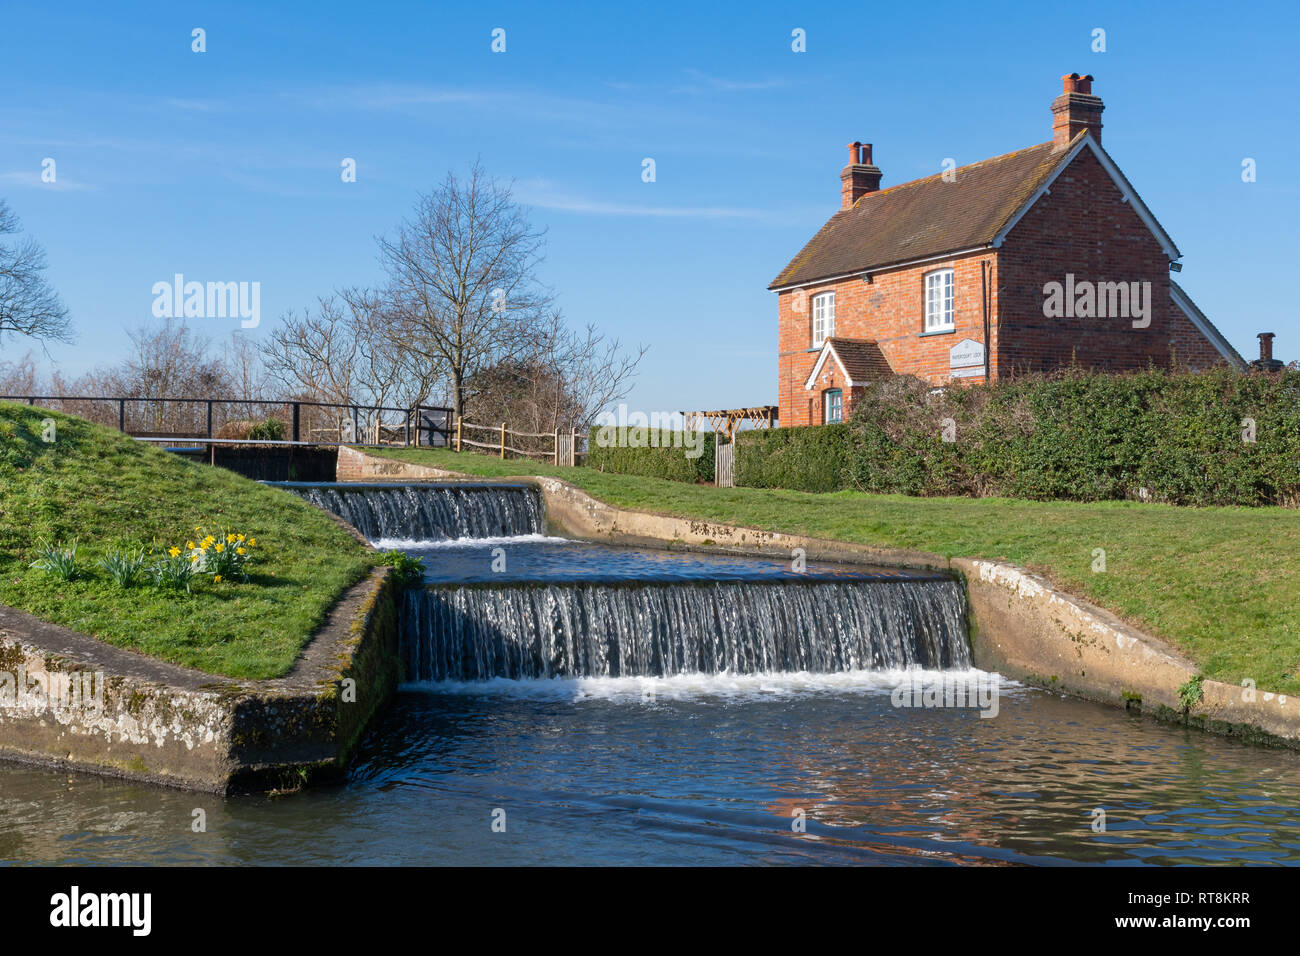 Papercourt Lock and lock keepers cottage on the picturesque River Wey Navigation in Surrey, UK, on a sunny day Stock Photo